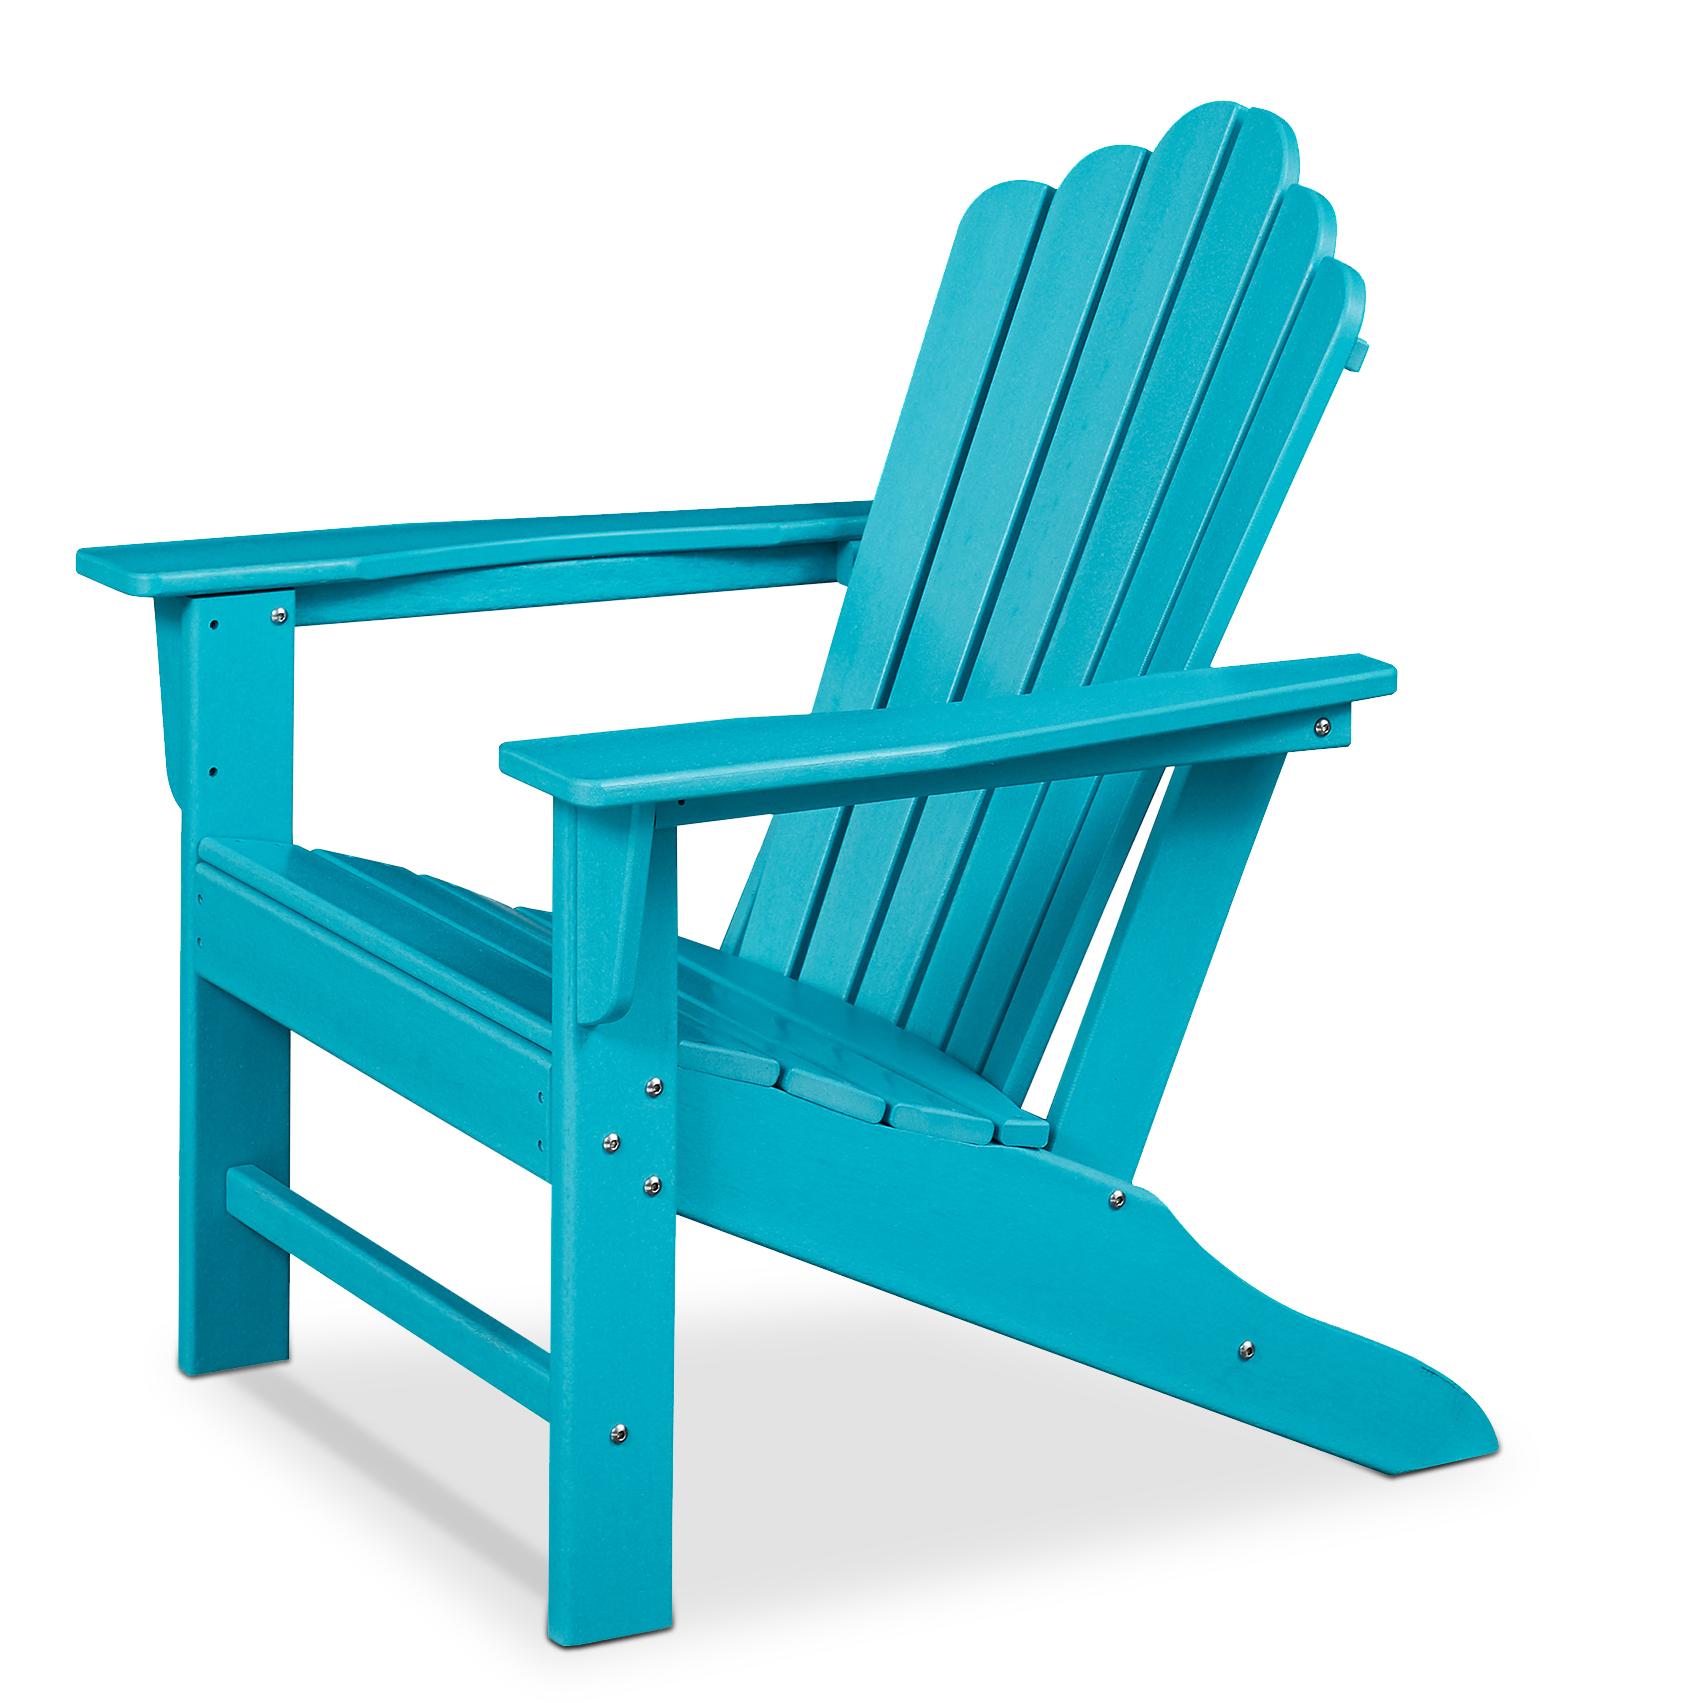 HDPE hard plastic classic outdoor Adirondack chair, weather resistant furniture